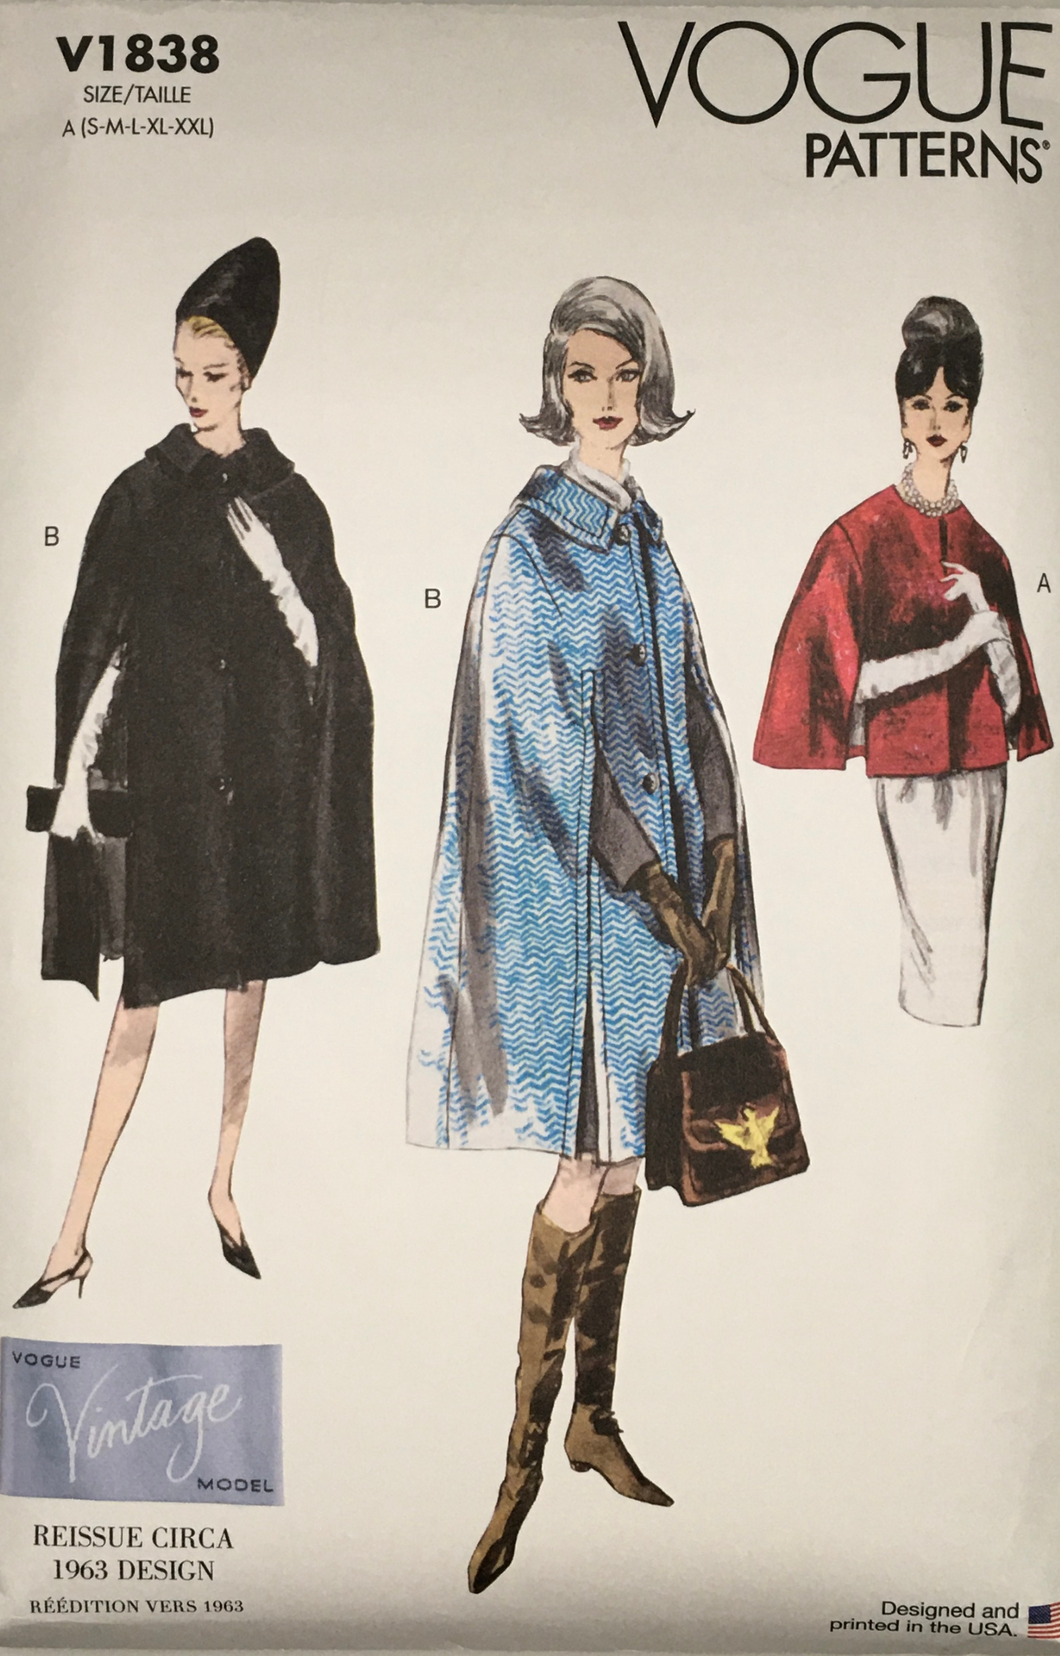 1963 Reproduction Sewing Pattern: Vogue V1838